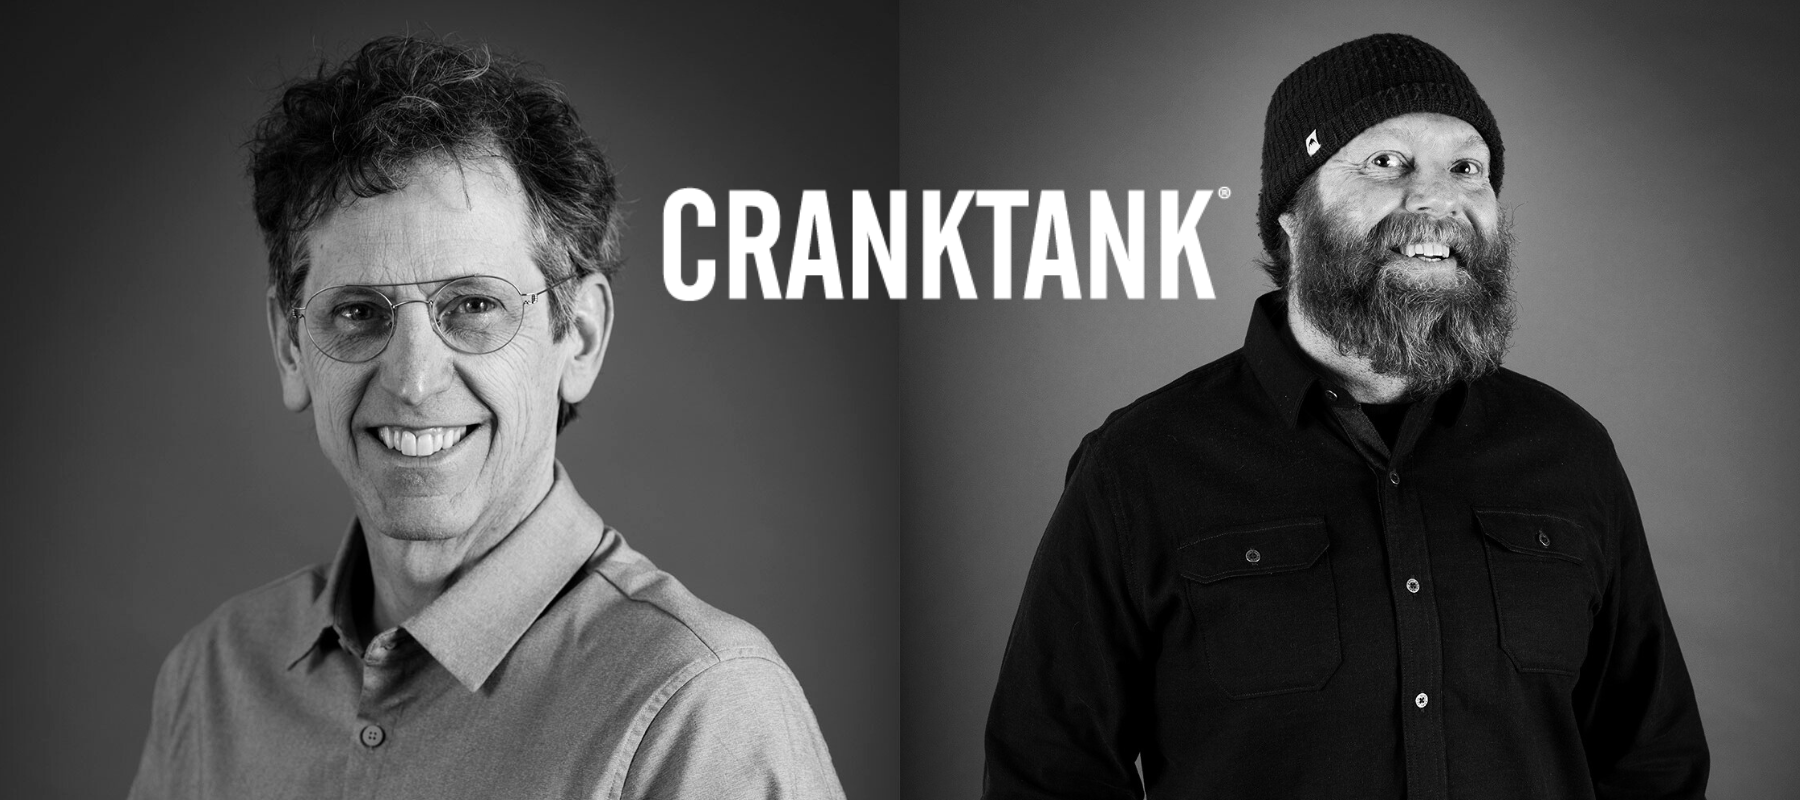 CrankTank expands e-Commerce and digital strategy services to Europe to serve U.S. and European brands